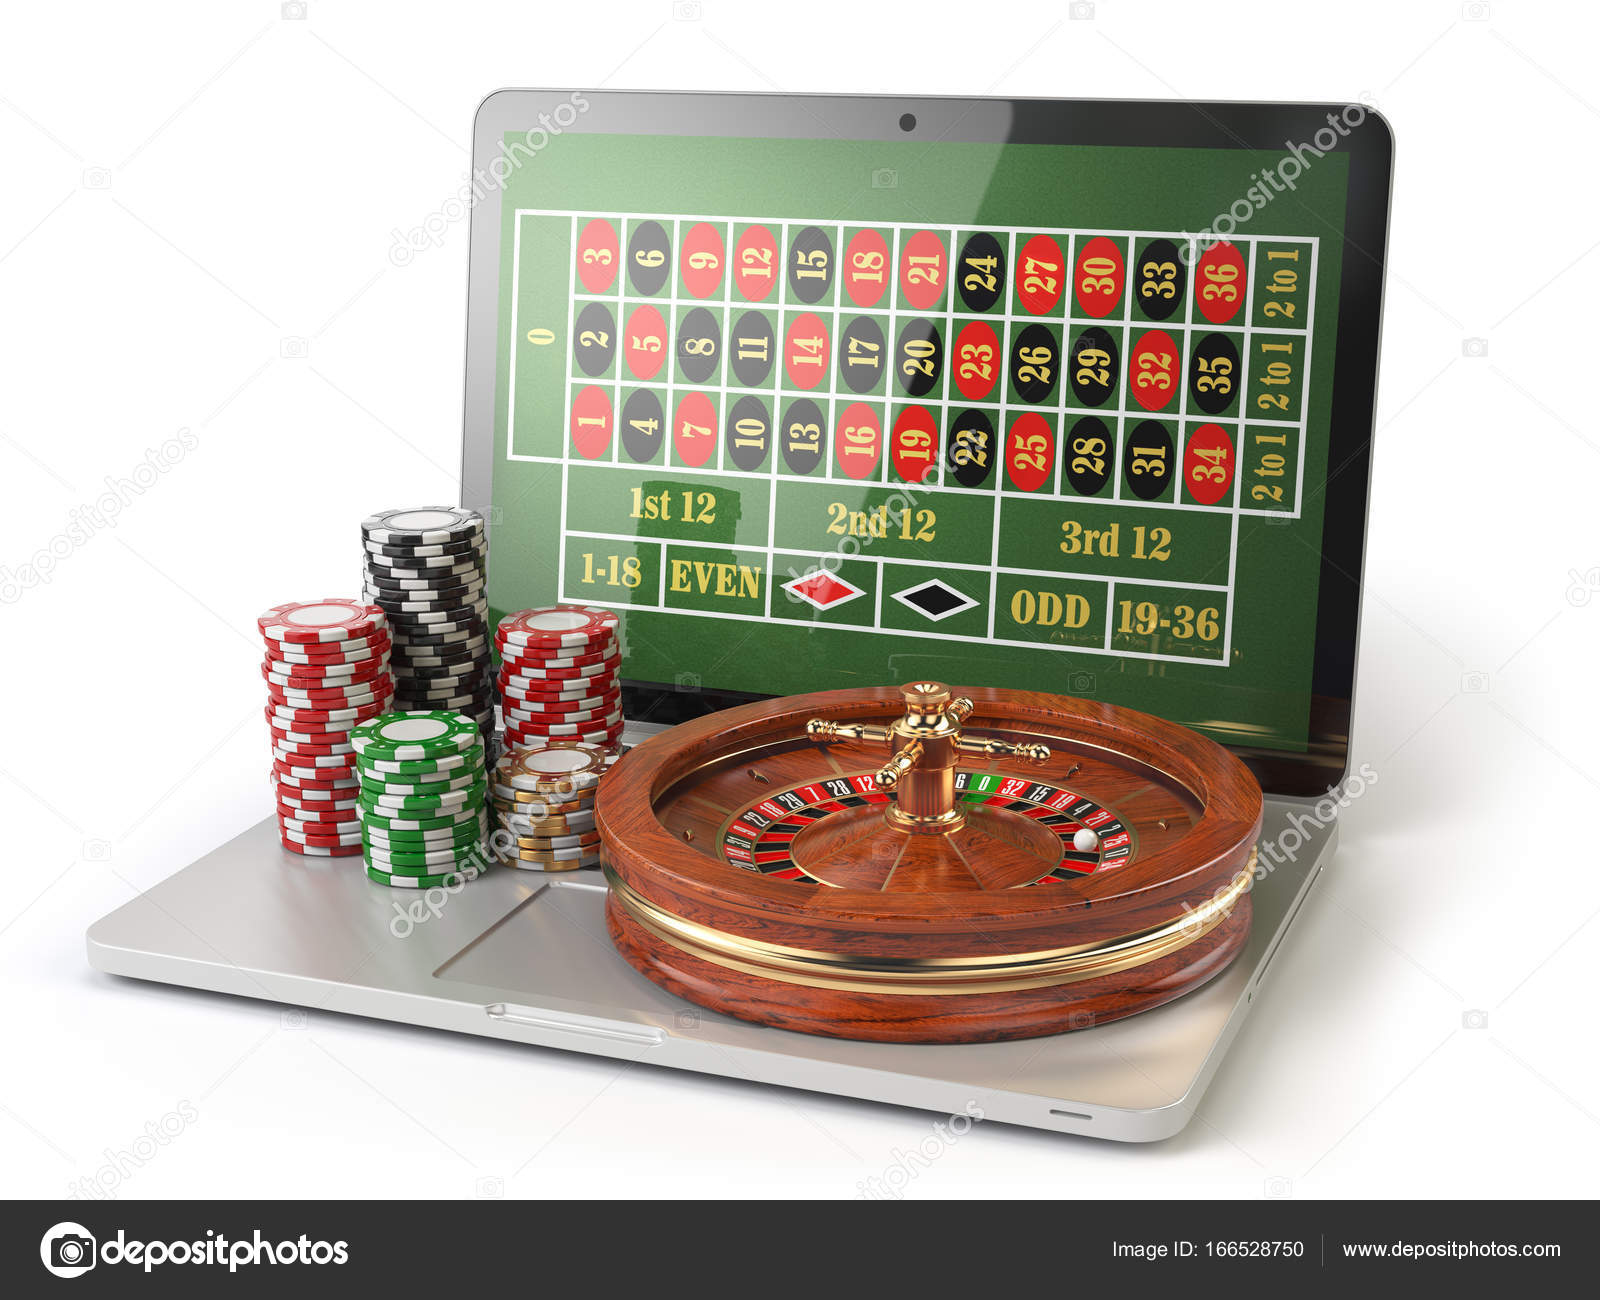 Can you play slots online for real money